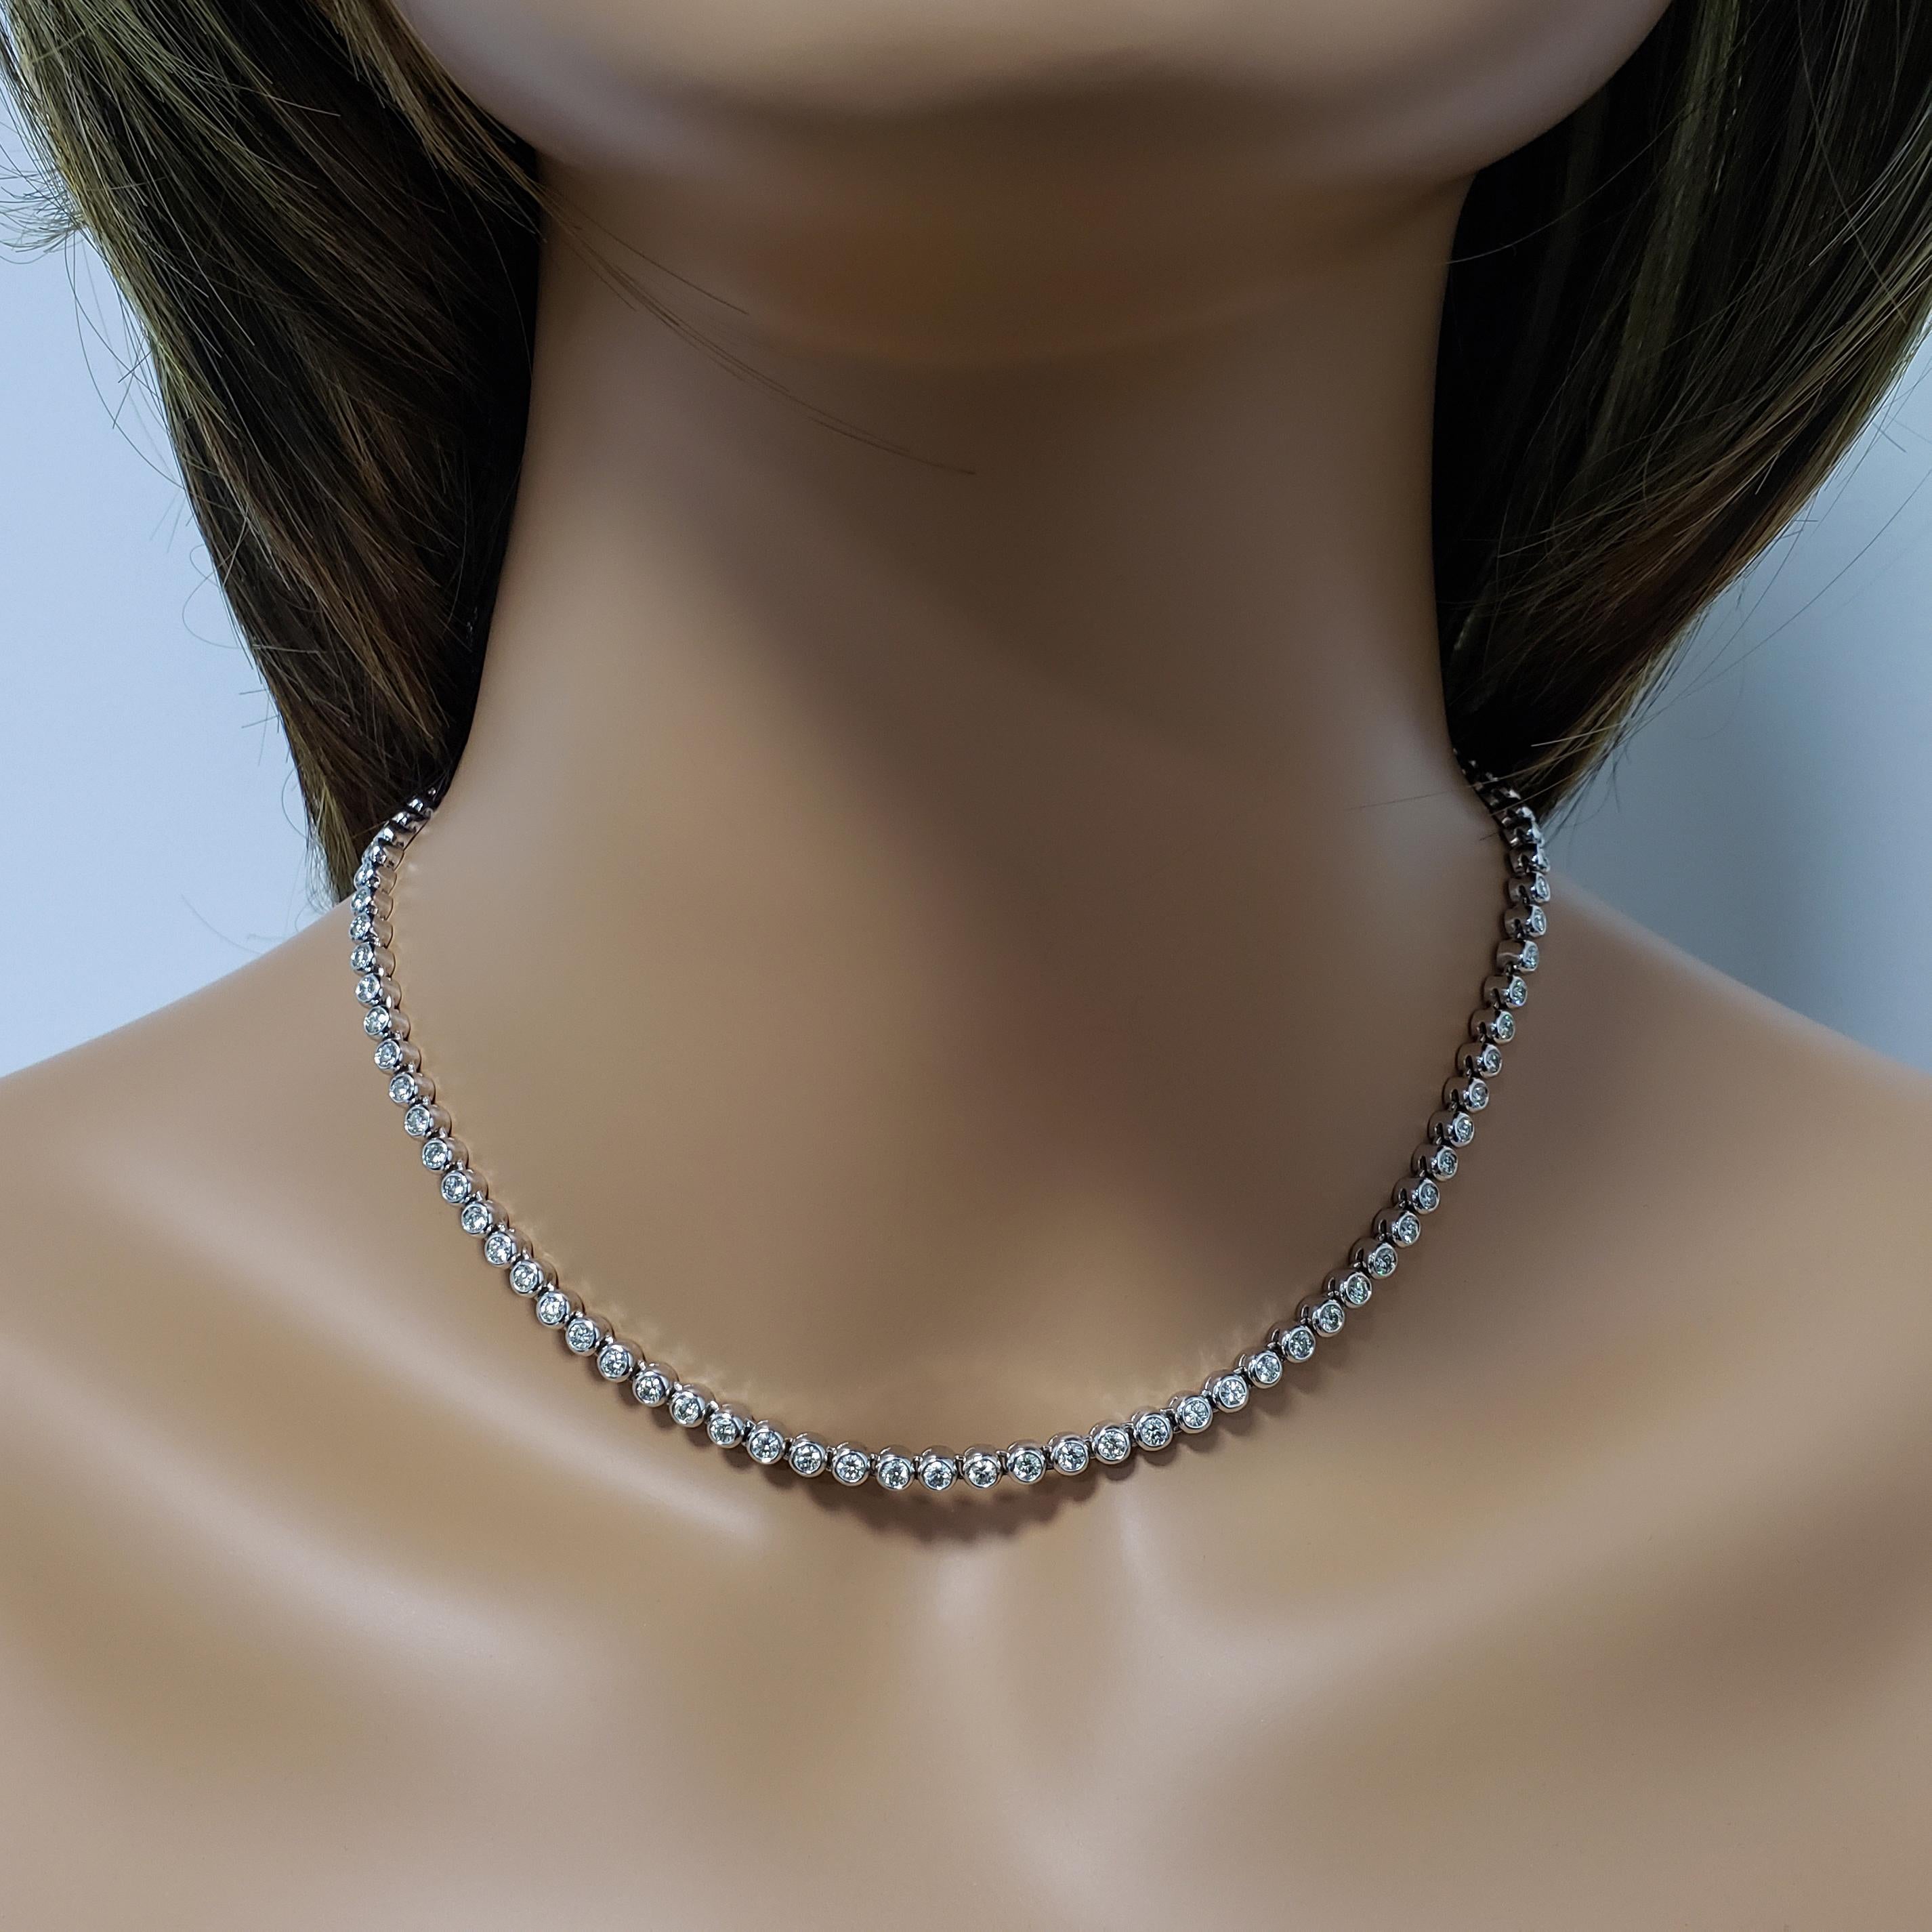 A classic and timeless tennis necklace showcasing round brilliant diamonds set in a bezel made in 14k white gold. Diamonds weigh 6.15 carats total.

Style available in different price ranges. Prices are based on your selection. Please contact us for